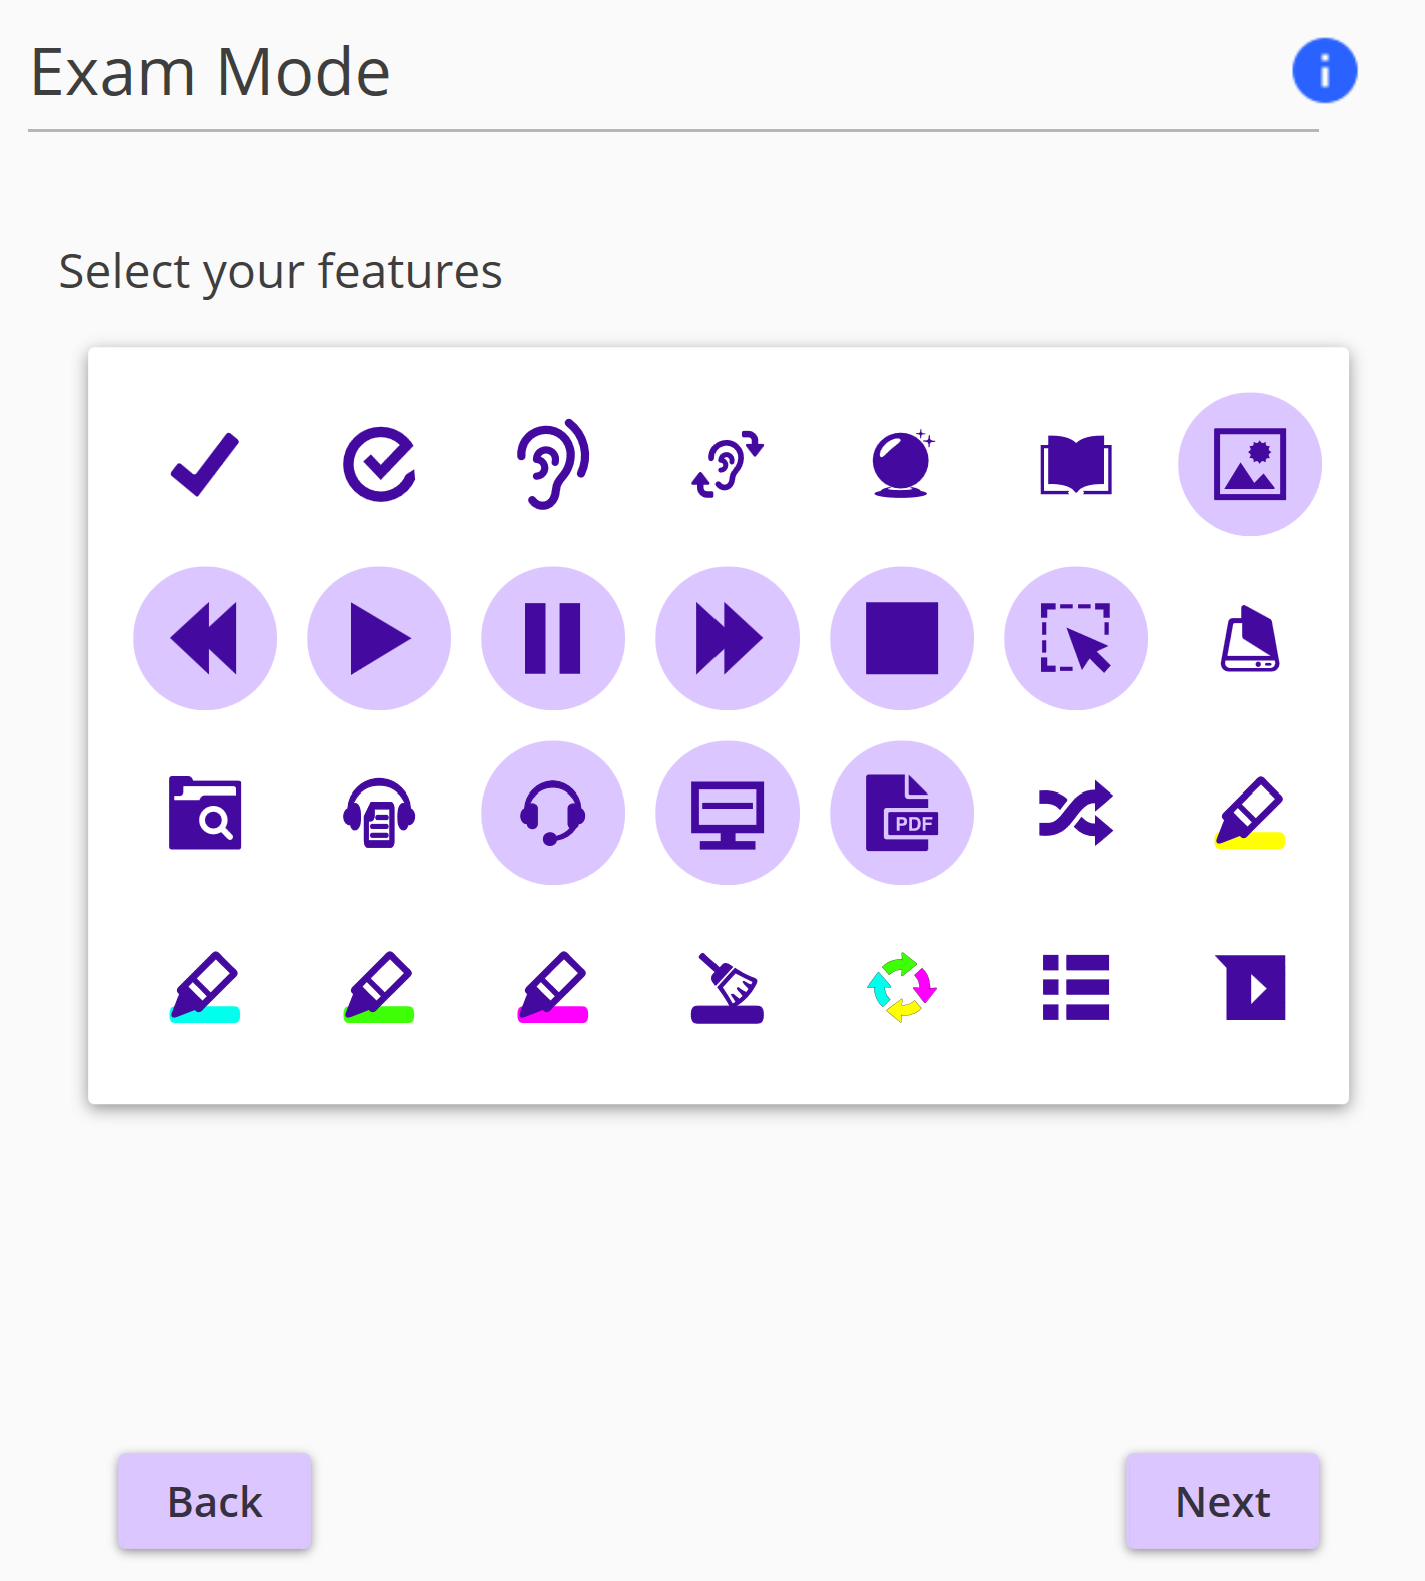 Select Features